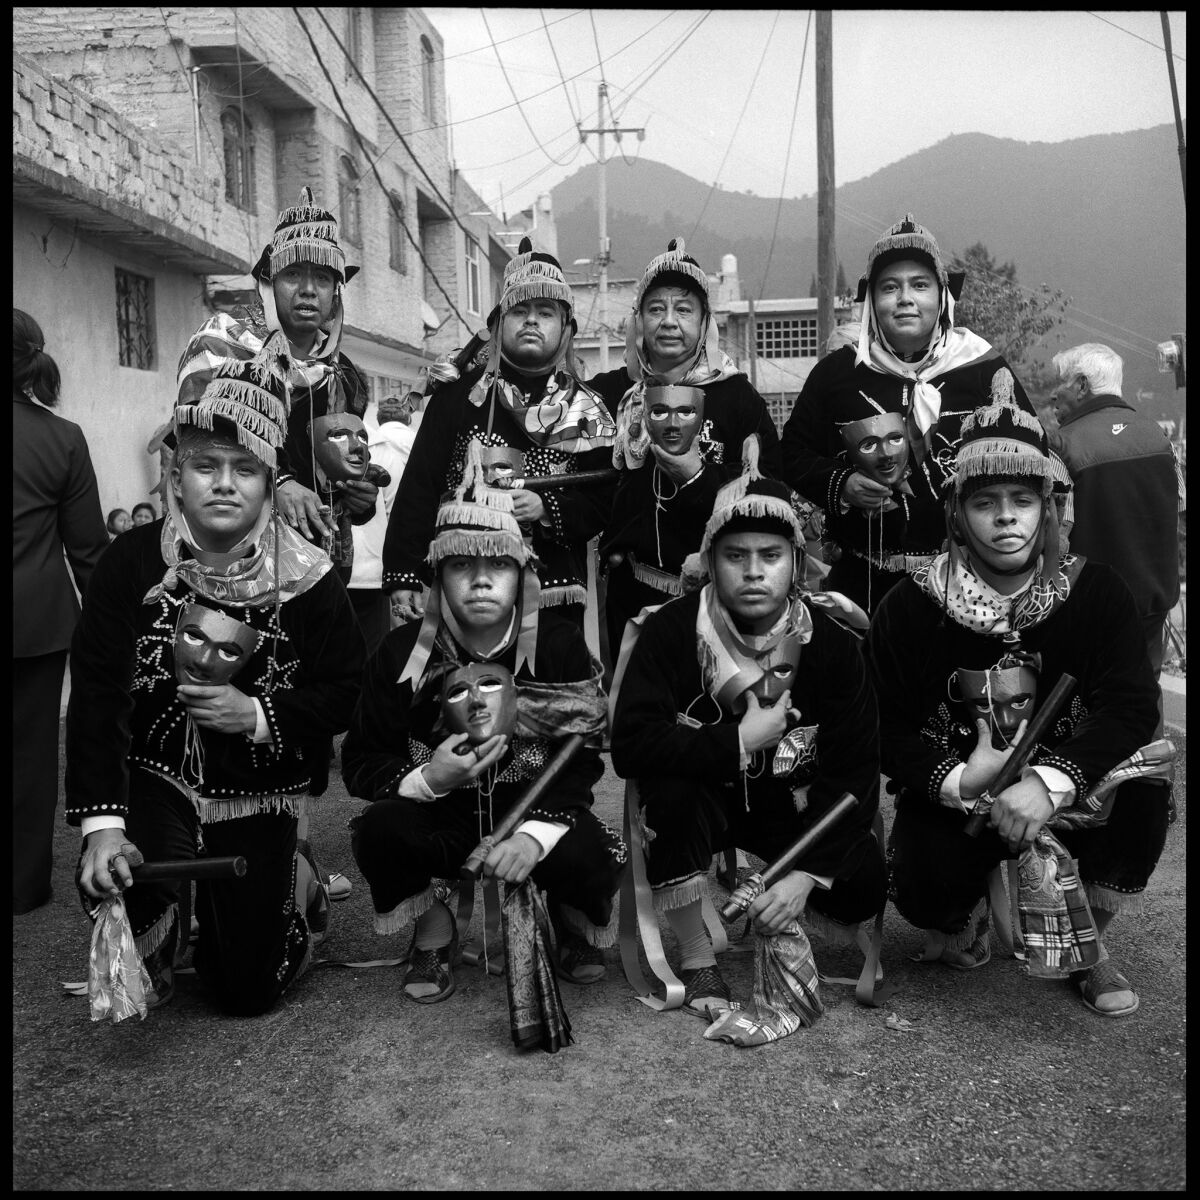 A group of Yalaltec dancers after they performed the "A Negritosa" traditional dance in Mexico City in October 2018.